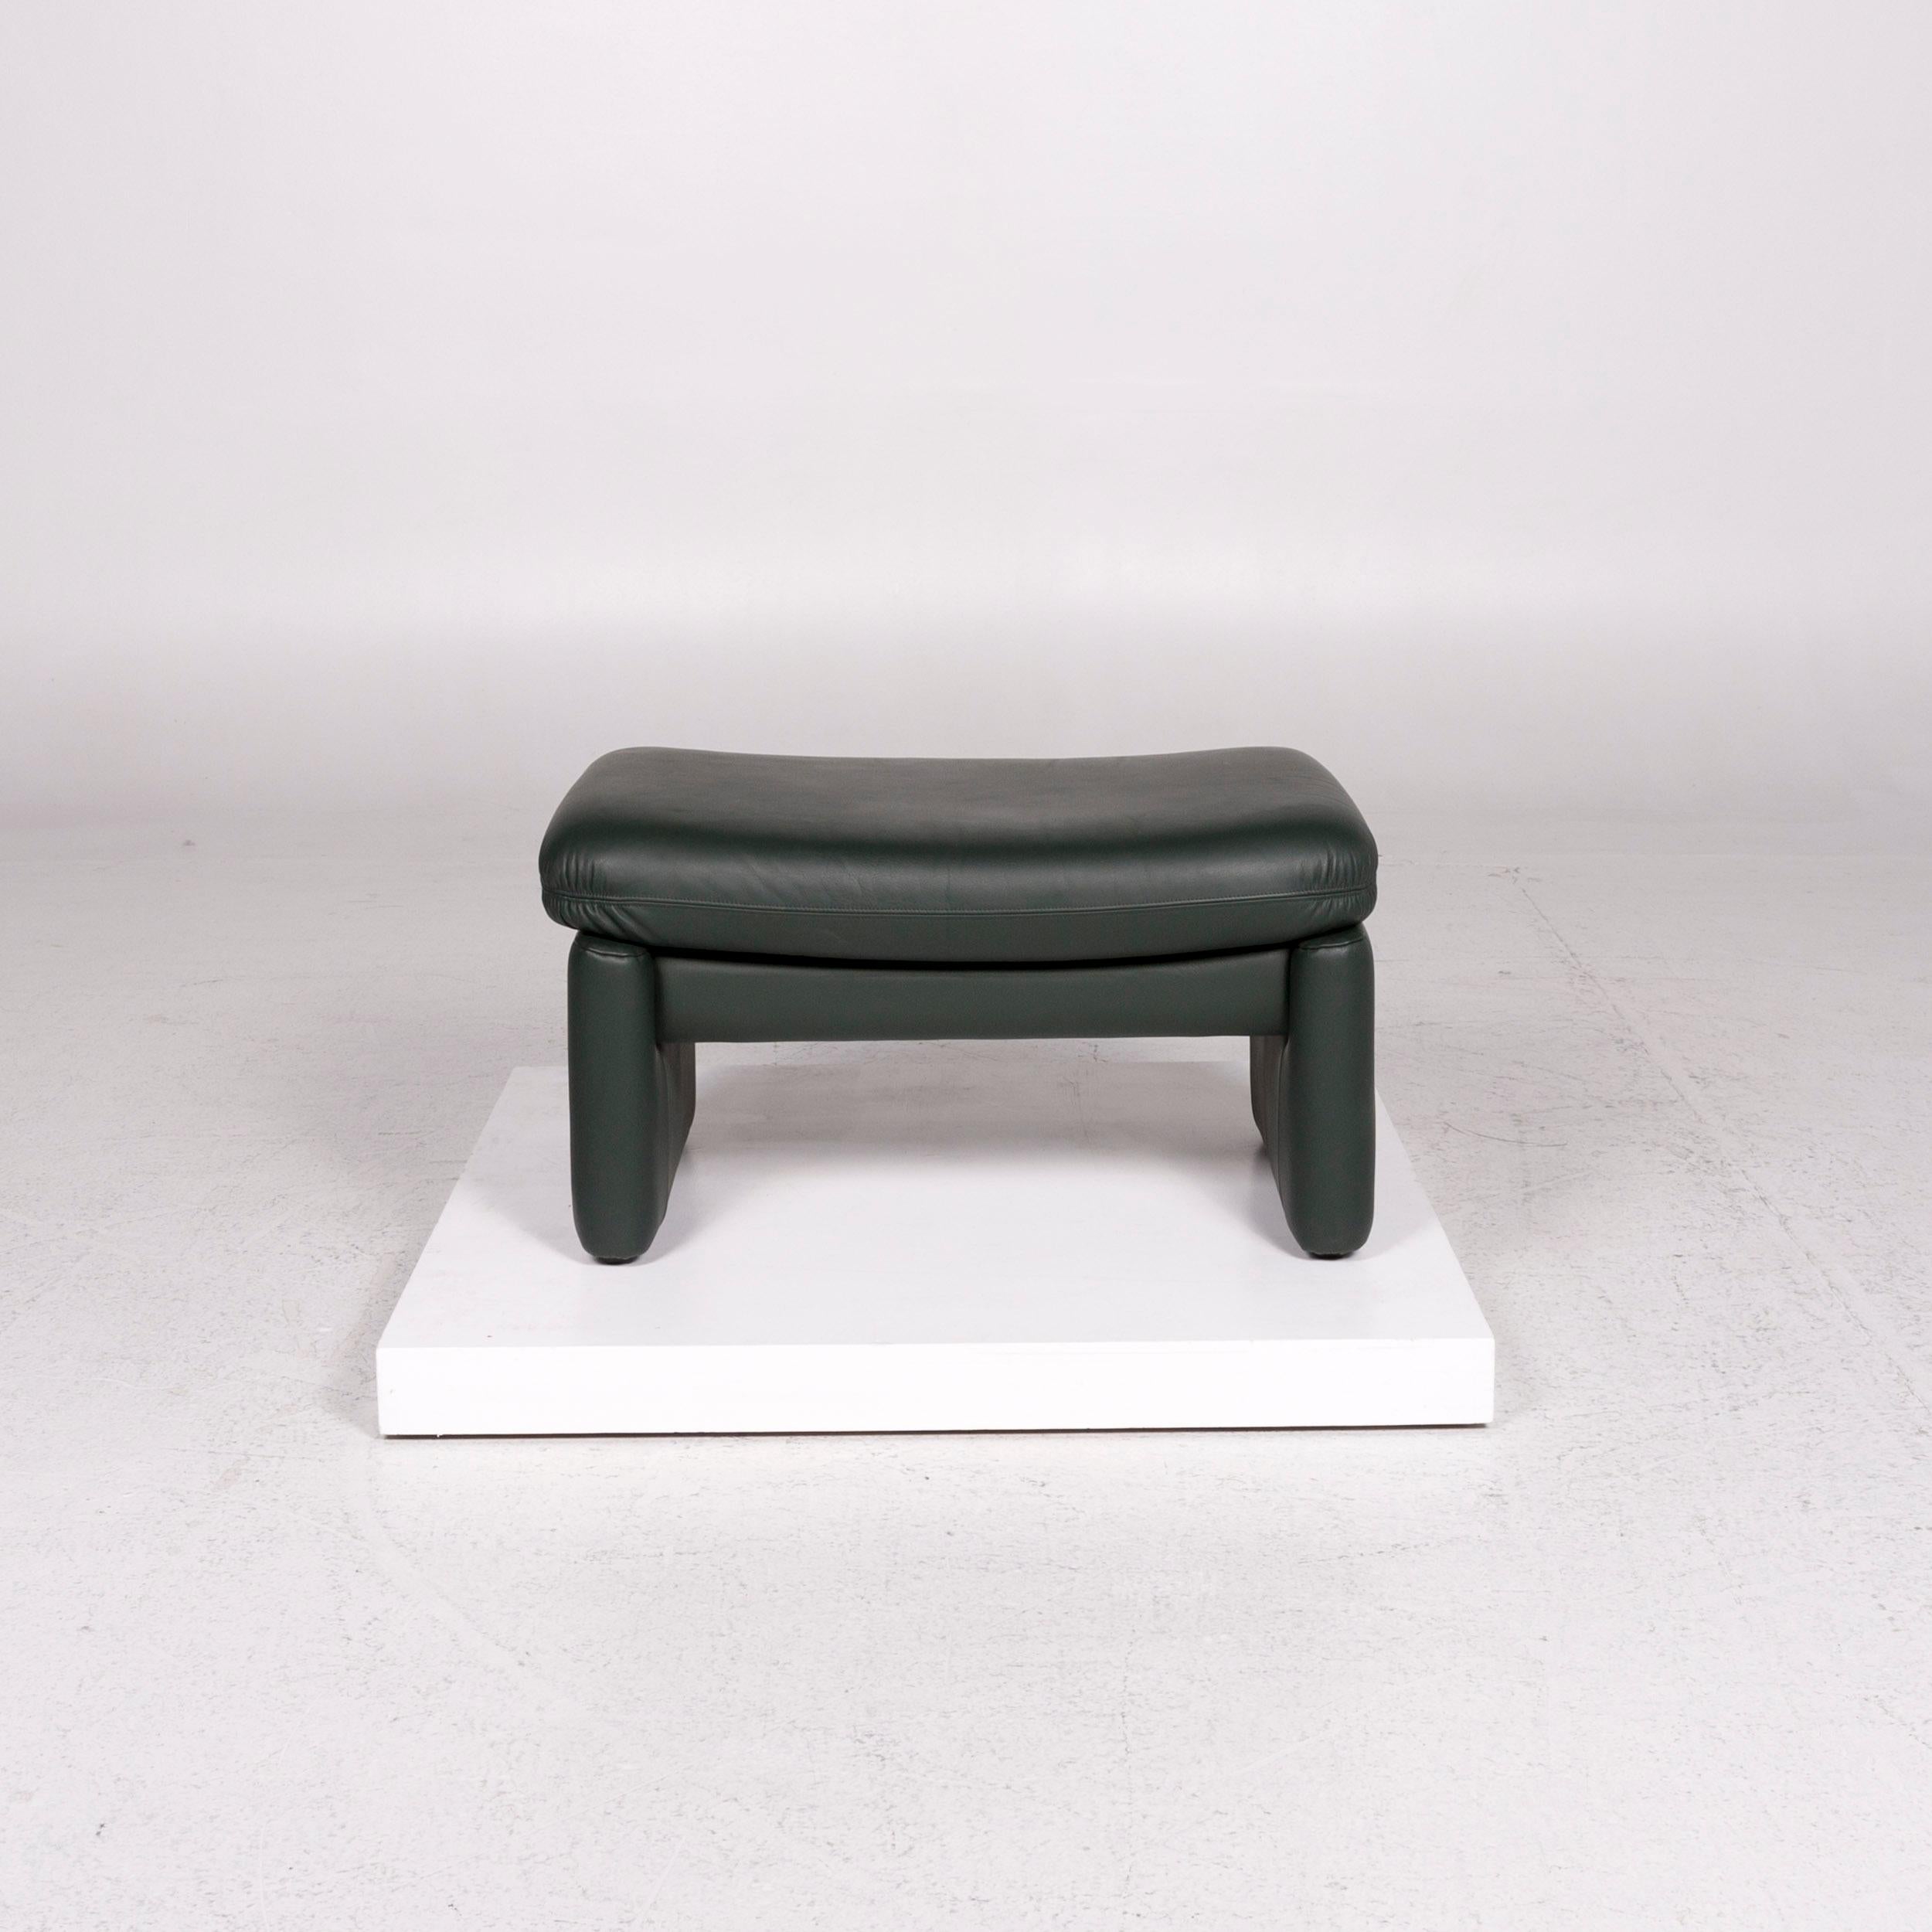 We bring to you an Erpo leather stool green stool.

 

 Product measurements in centimeters:
 

Depth 52
Width 81
Height 41.




       